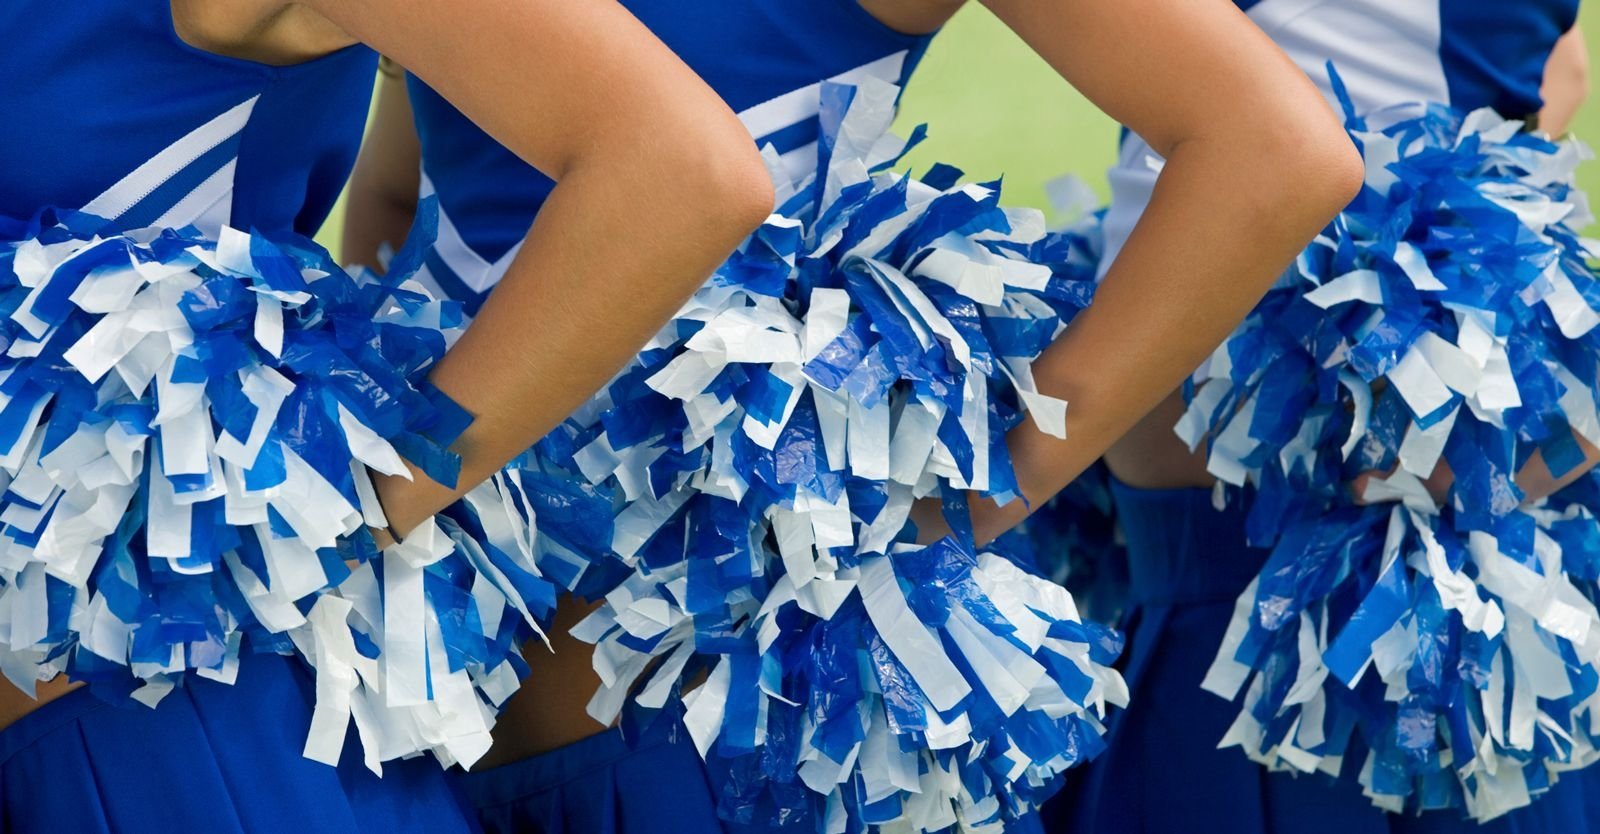 Close up of cheerleaders holding blue and white pom poms by their waists